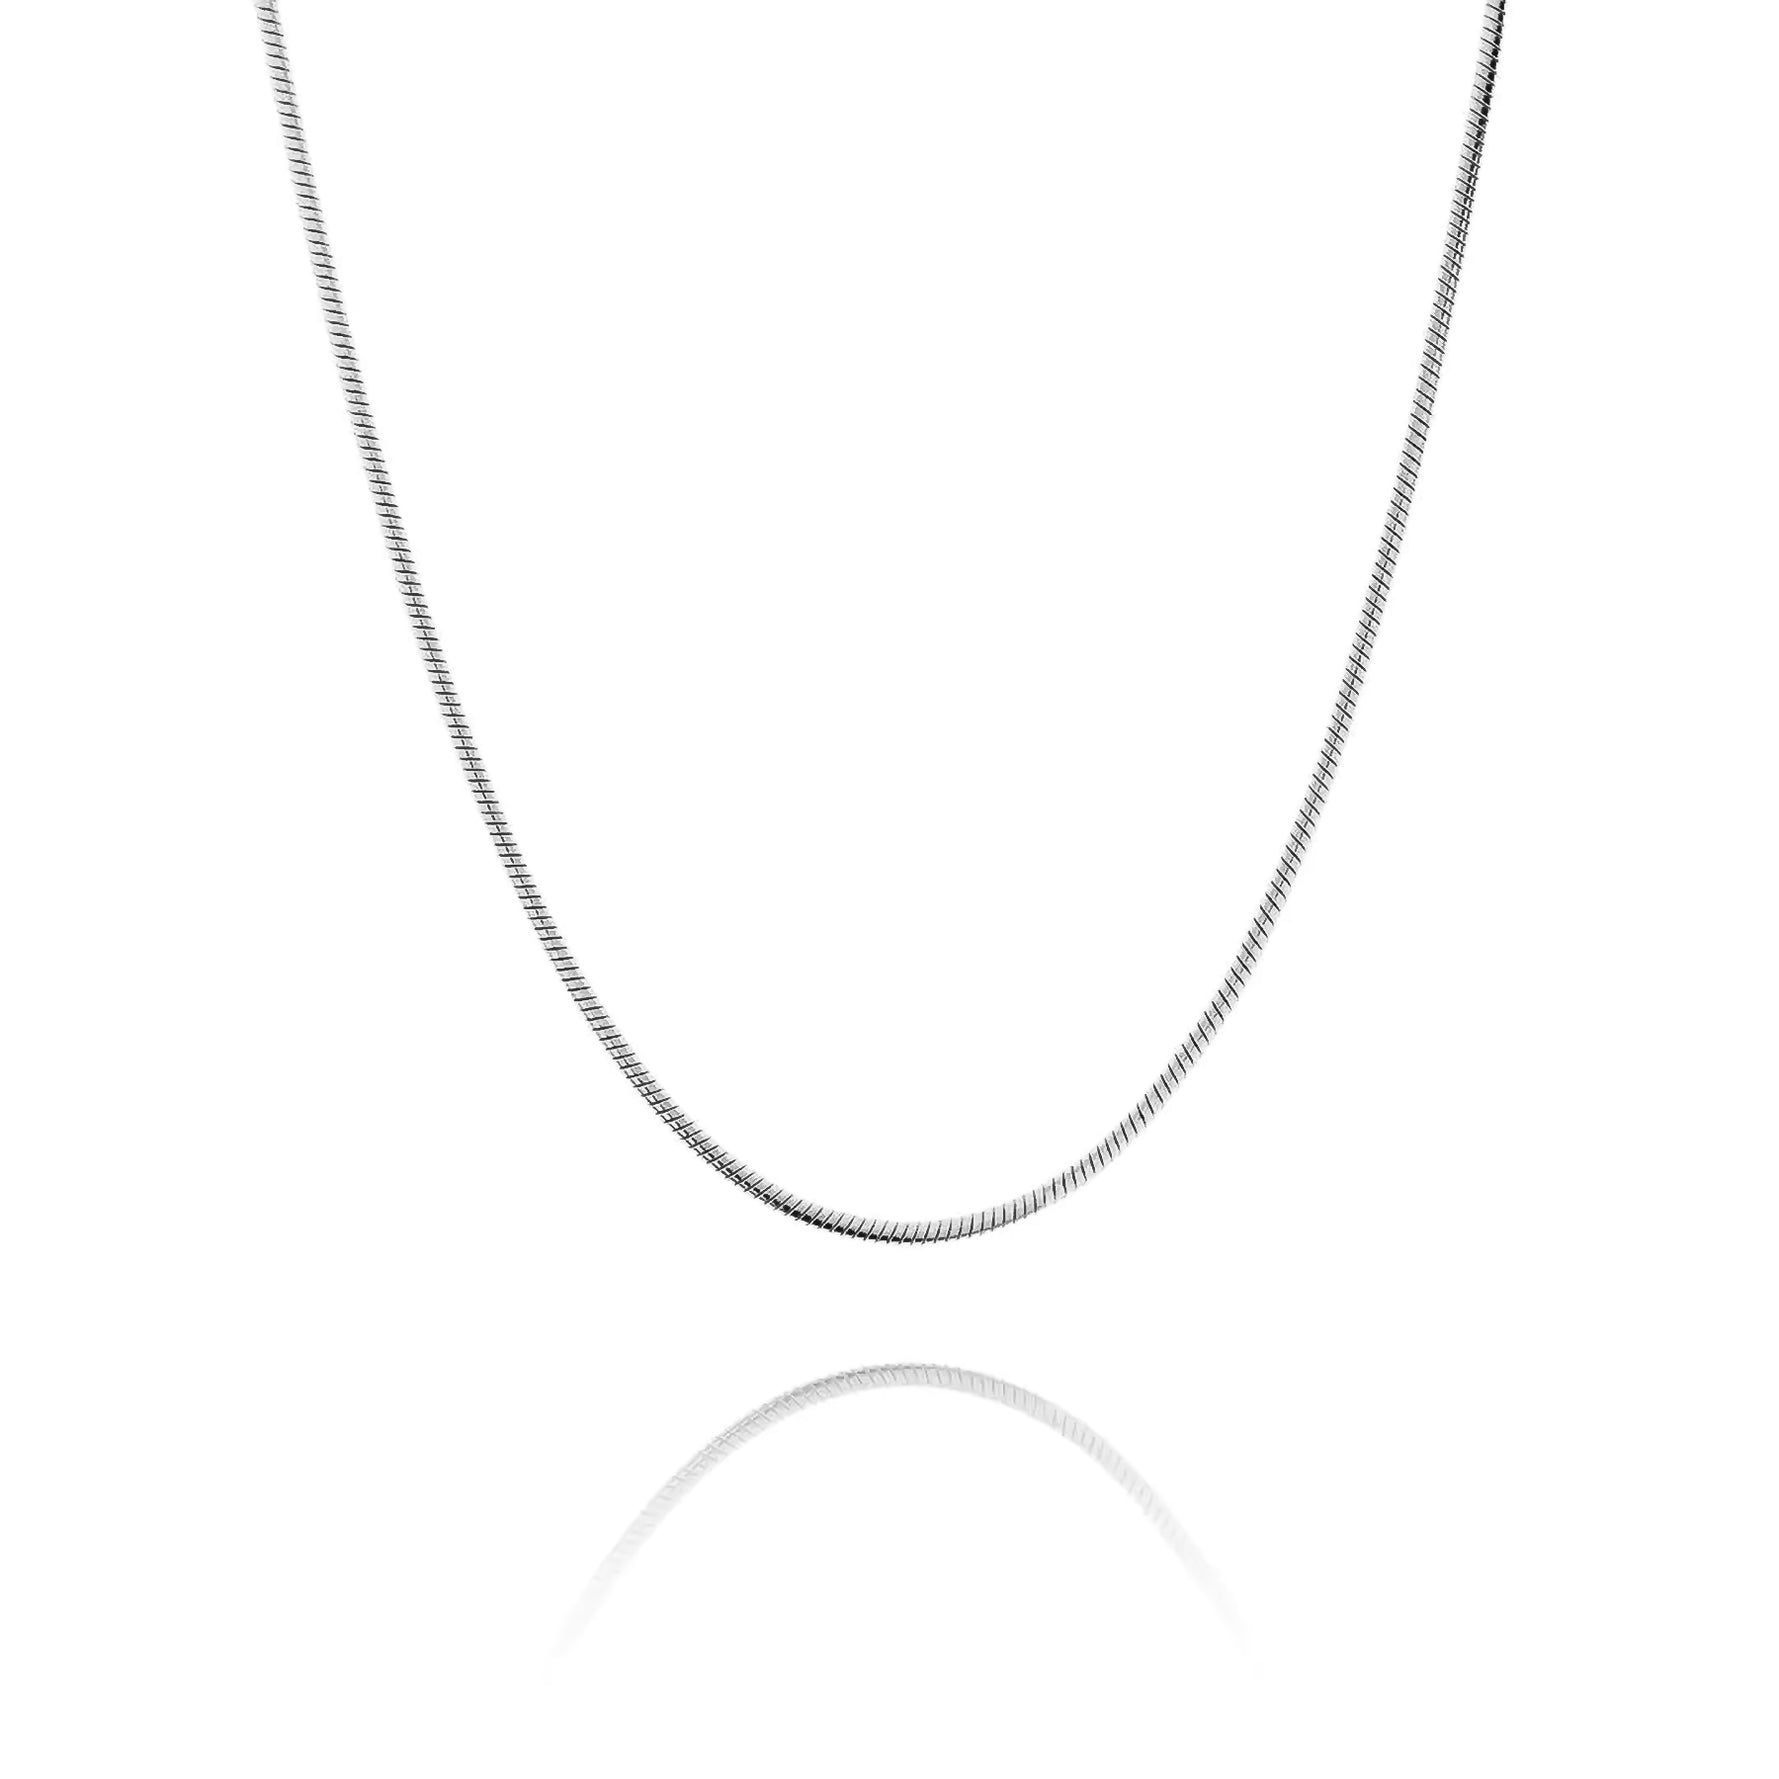 1.3MM STERLING SILVER REAL SNAKE CHAIN